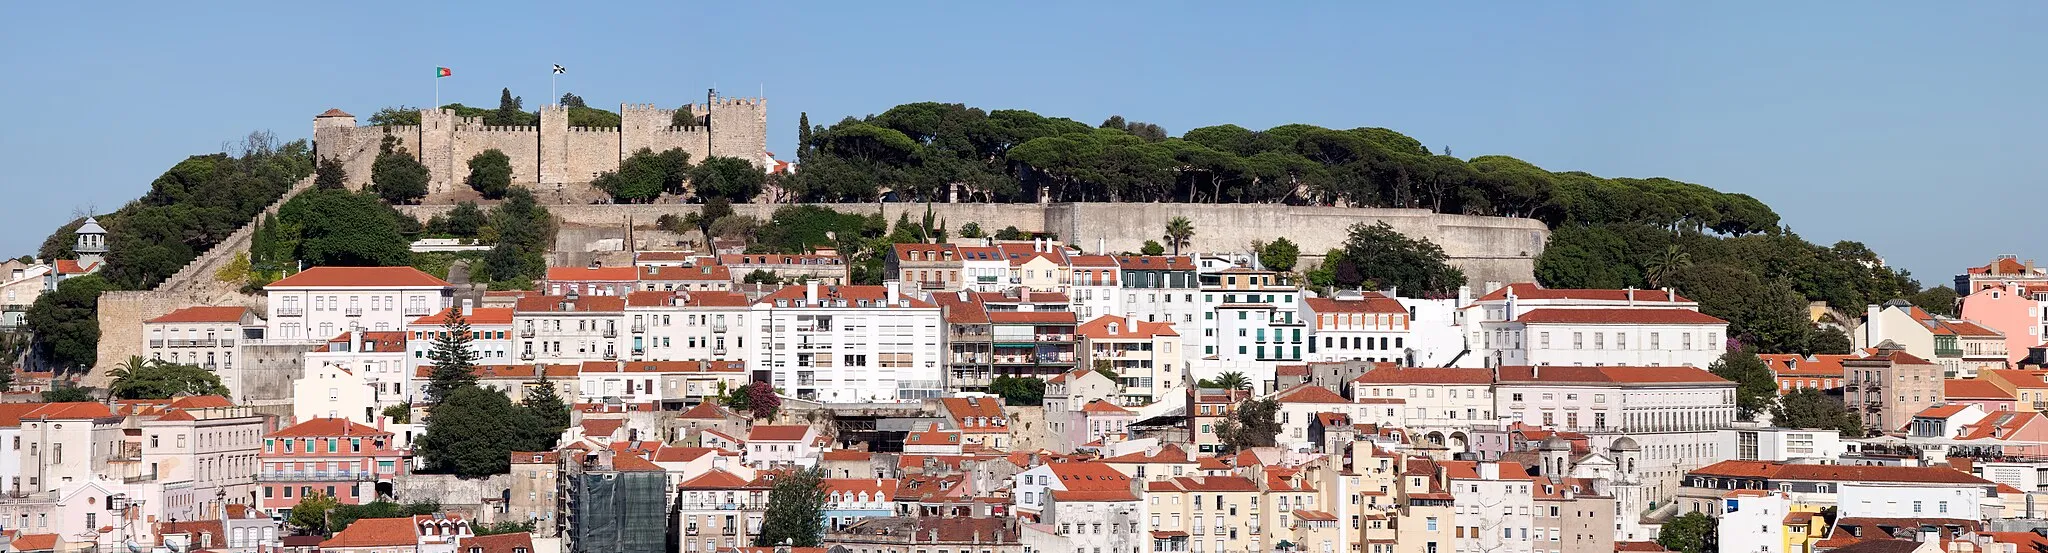 Photo showing: The Castle of São Jorge occupies a commanding position overlooking the city of Lisbon, the capital of Portugal, and the Tagus River beyond. The fortified citadel, which dates from medieval times, is located atop the highest hill in the historic center of the city. The castle is one of the main historical and touristic sites of Lisbon.